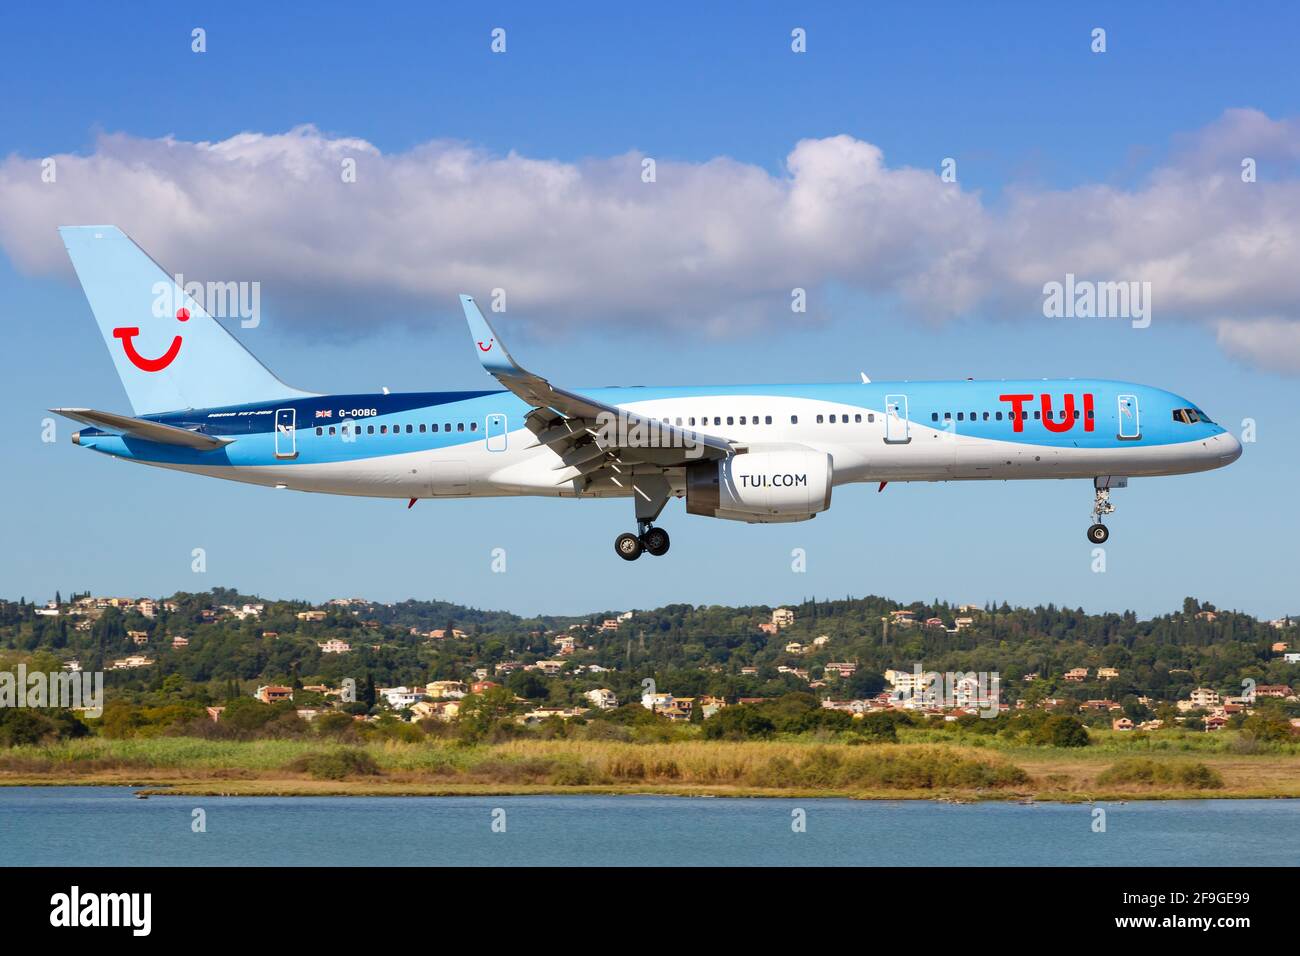 Corfu, Greece - September 15, 2017: TUI Boeing 757 airplane at Corfu airport (CFU) in Greece. Boeing is an aircraft manufacturer based in Seattle, Was Stock Photo